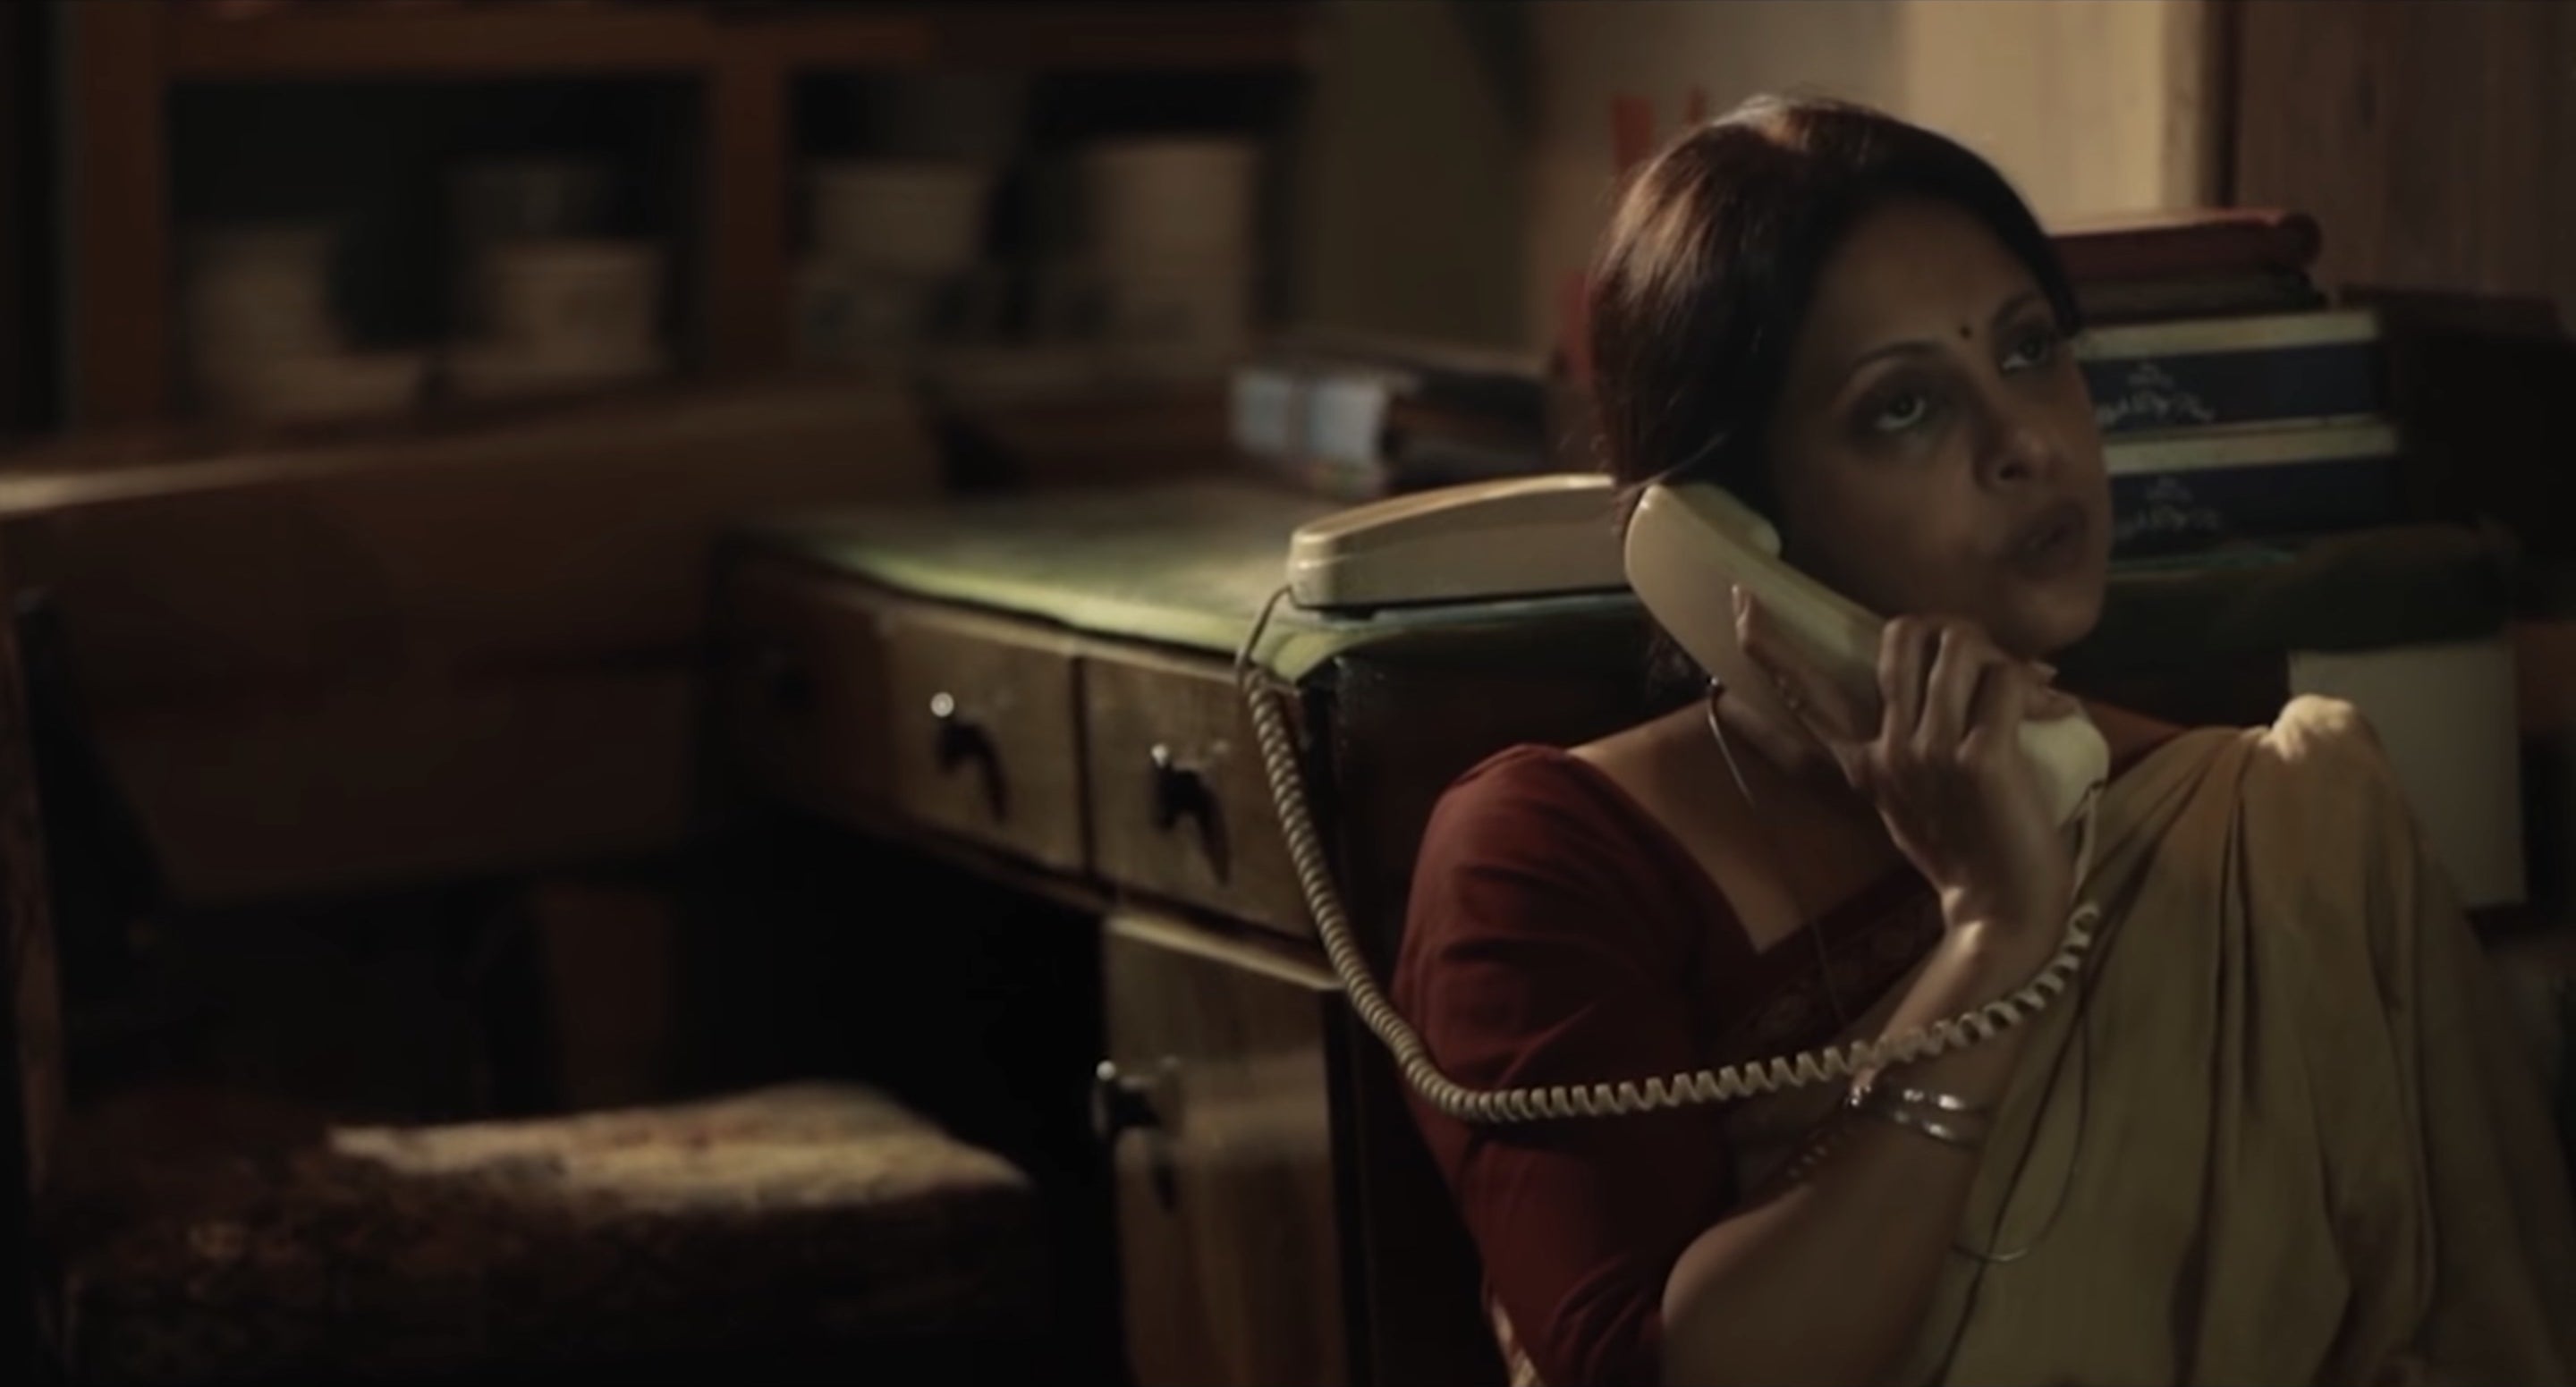 Shefali Shah speaking on a telephone in a still from the film